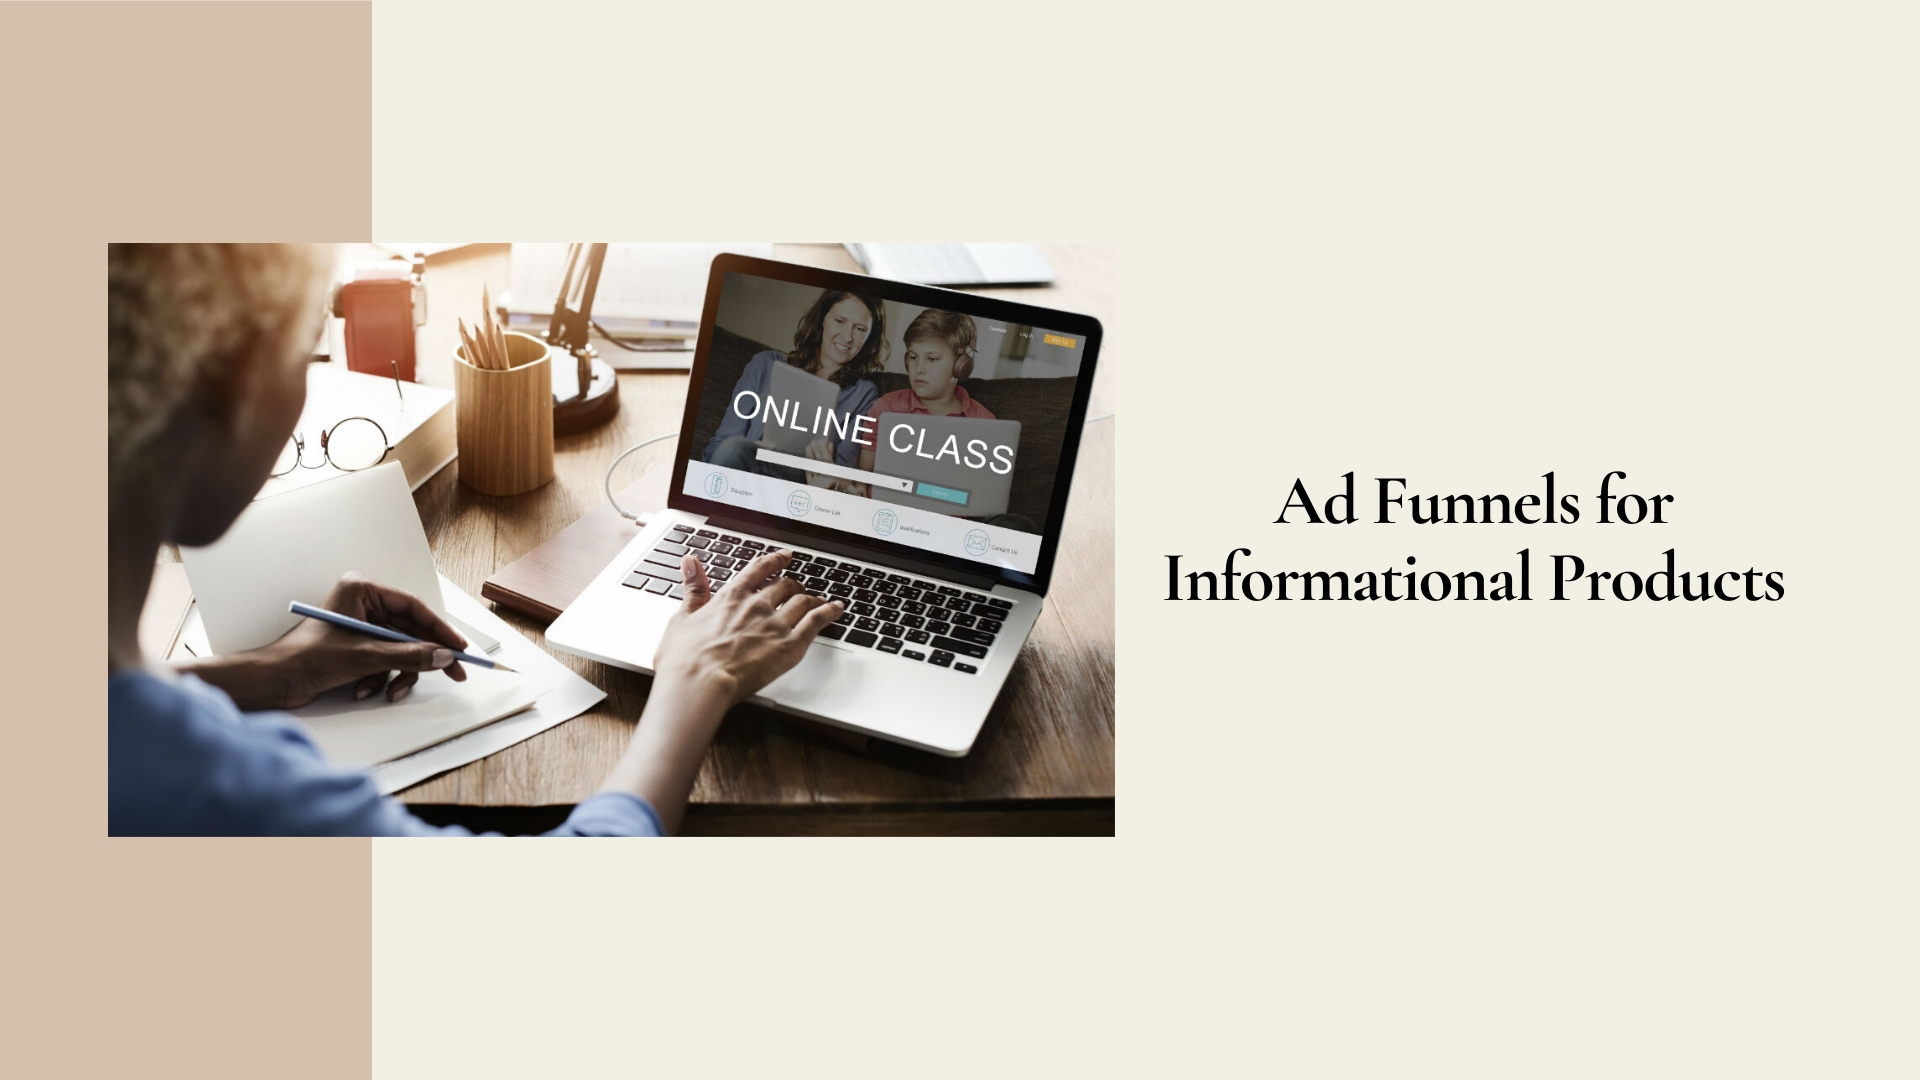 Ad Funnels for Informational Products